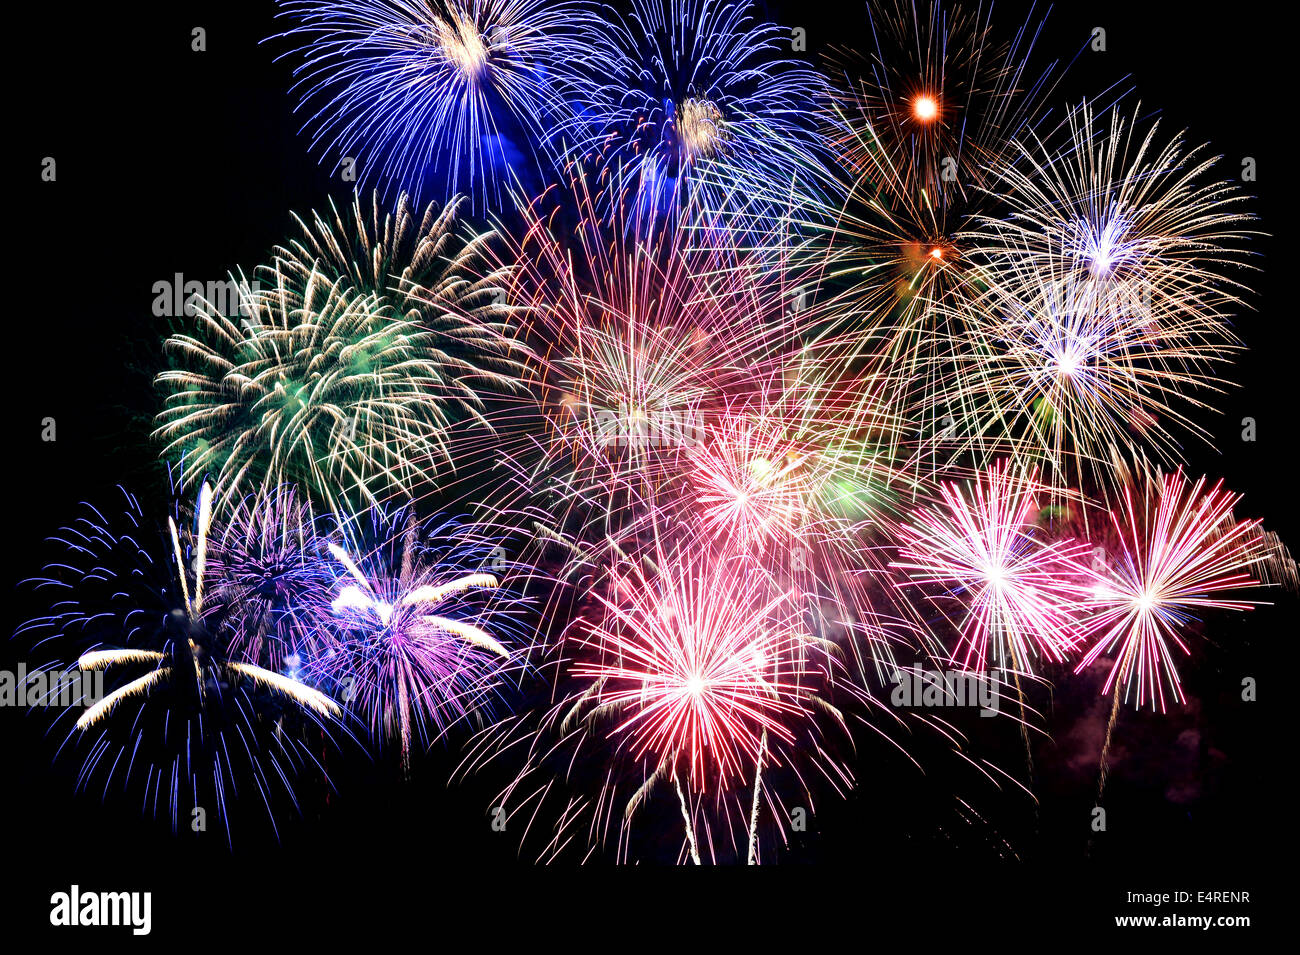 Grand finale of fireworks over dark background Stock Photo